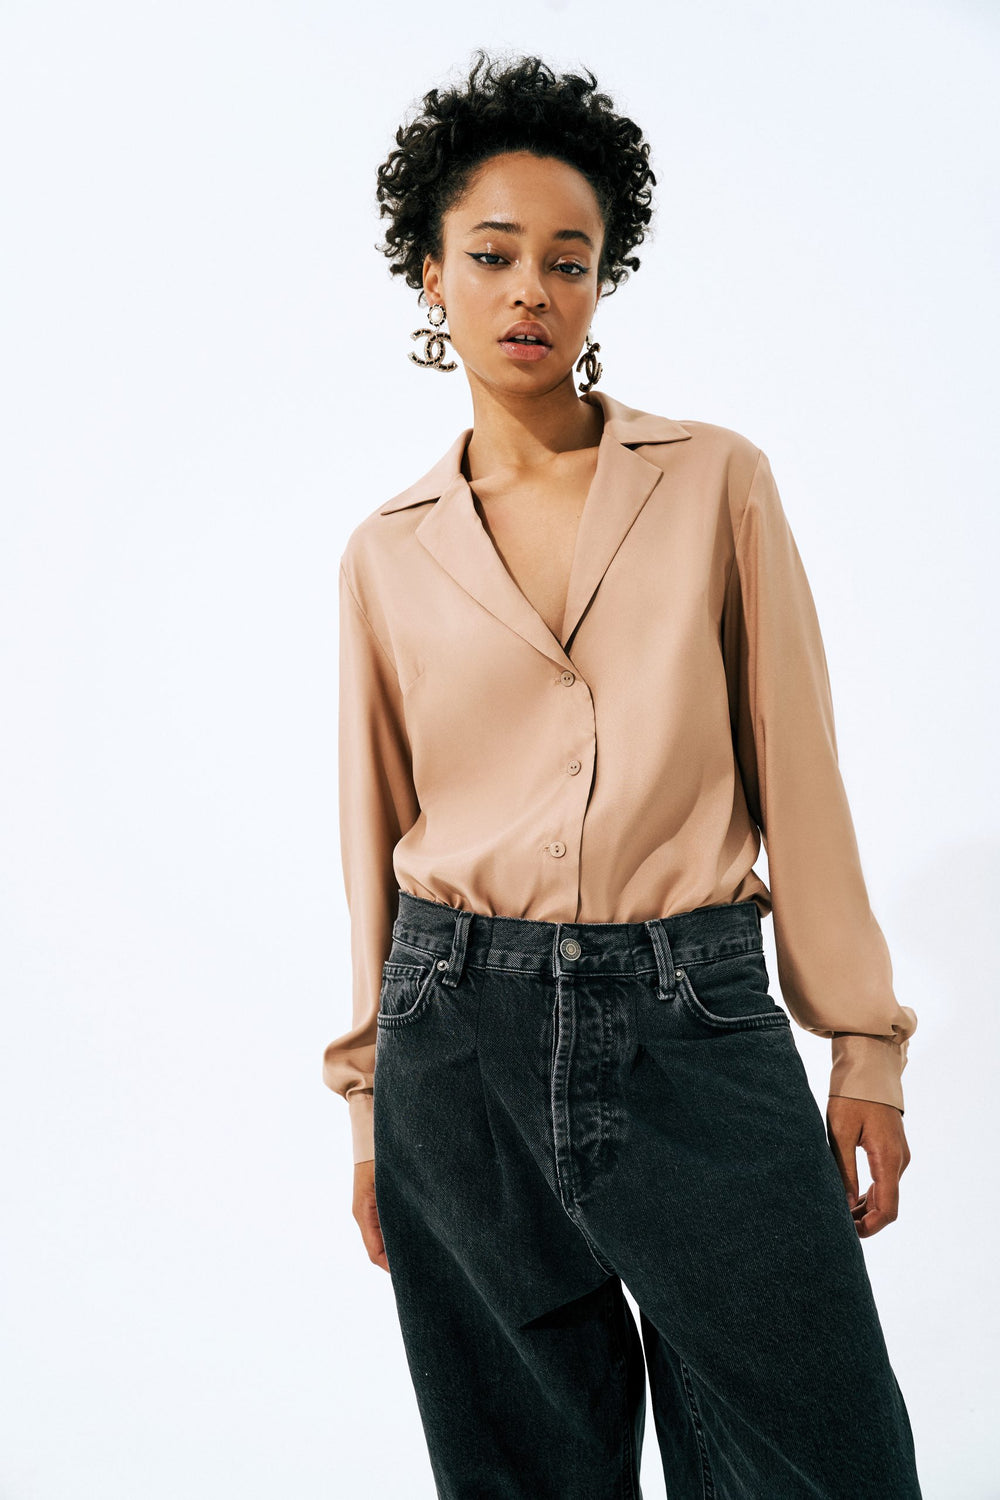 Woman wearing the Jenna Blouse sewing pattern from Vikisews on The Fold Line. A blouse pattern made in silk, silk velvet, challis or modal fabrics, featuring a loose-fit, straight silhouette, V-neck, bust darts, notched collar with stand, dropped shoulder